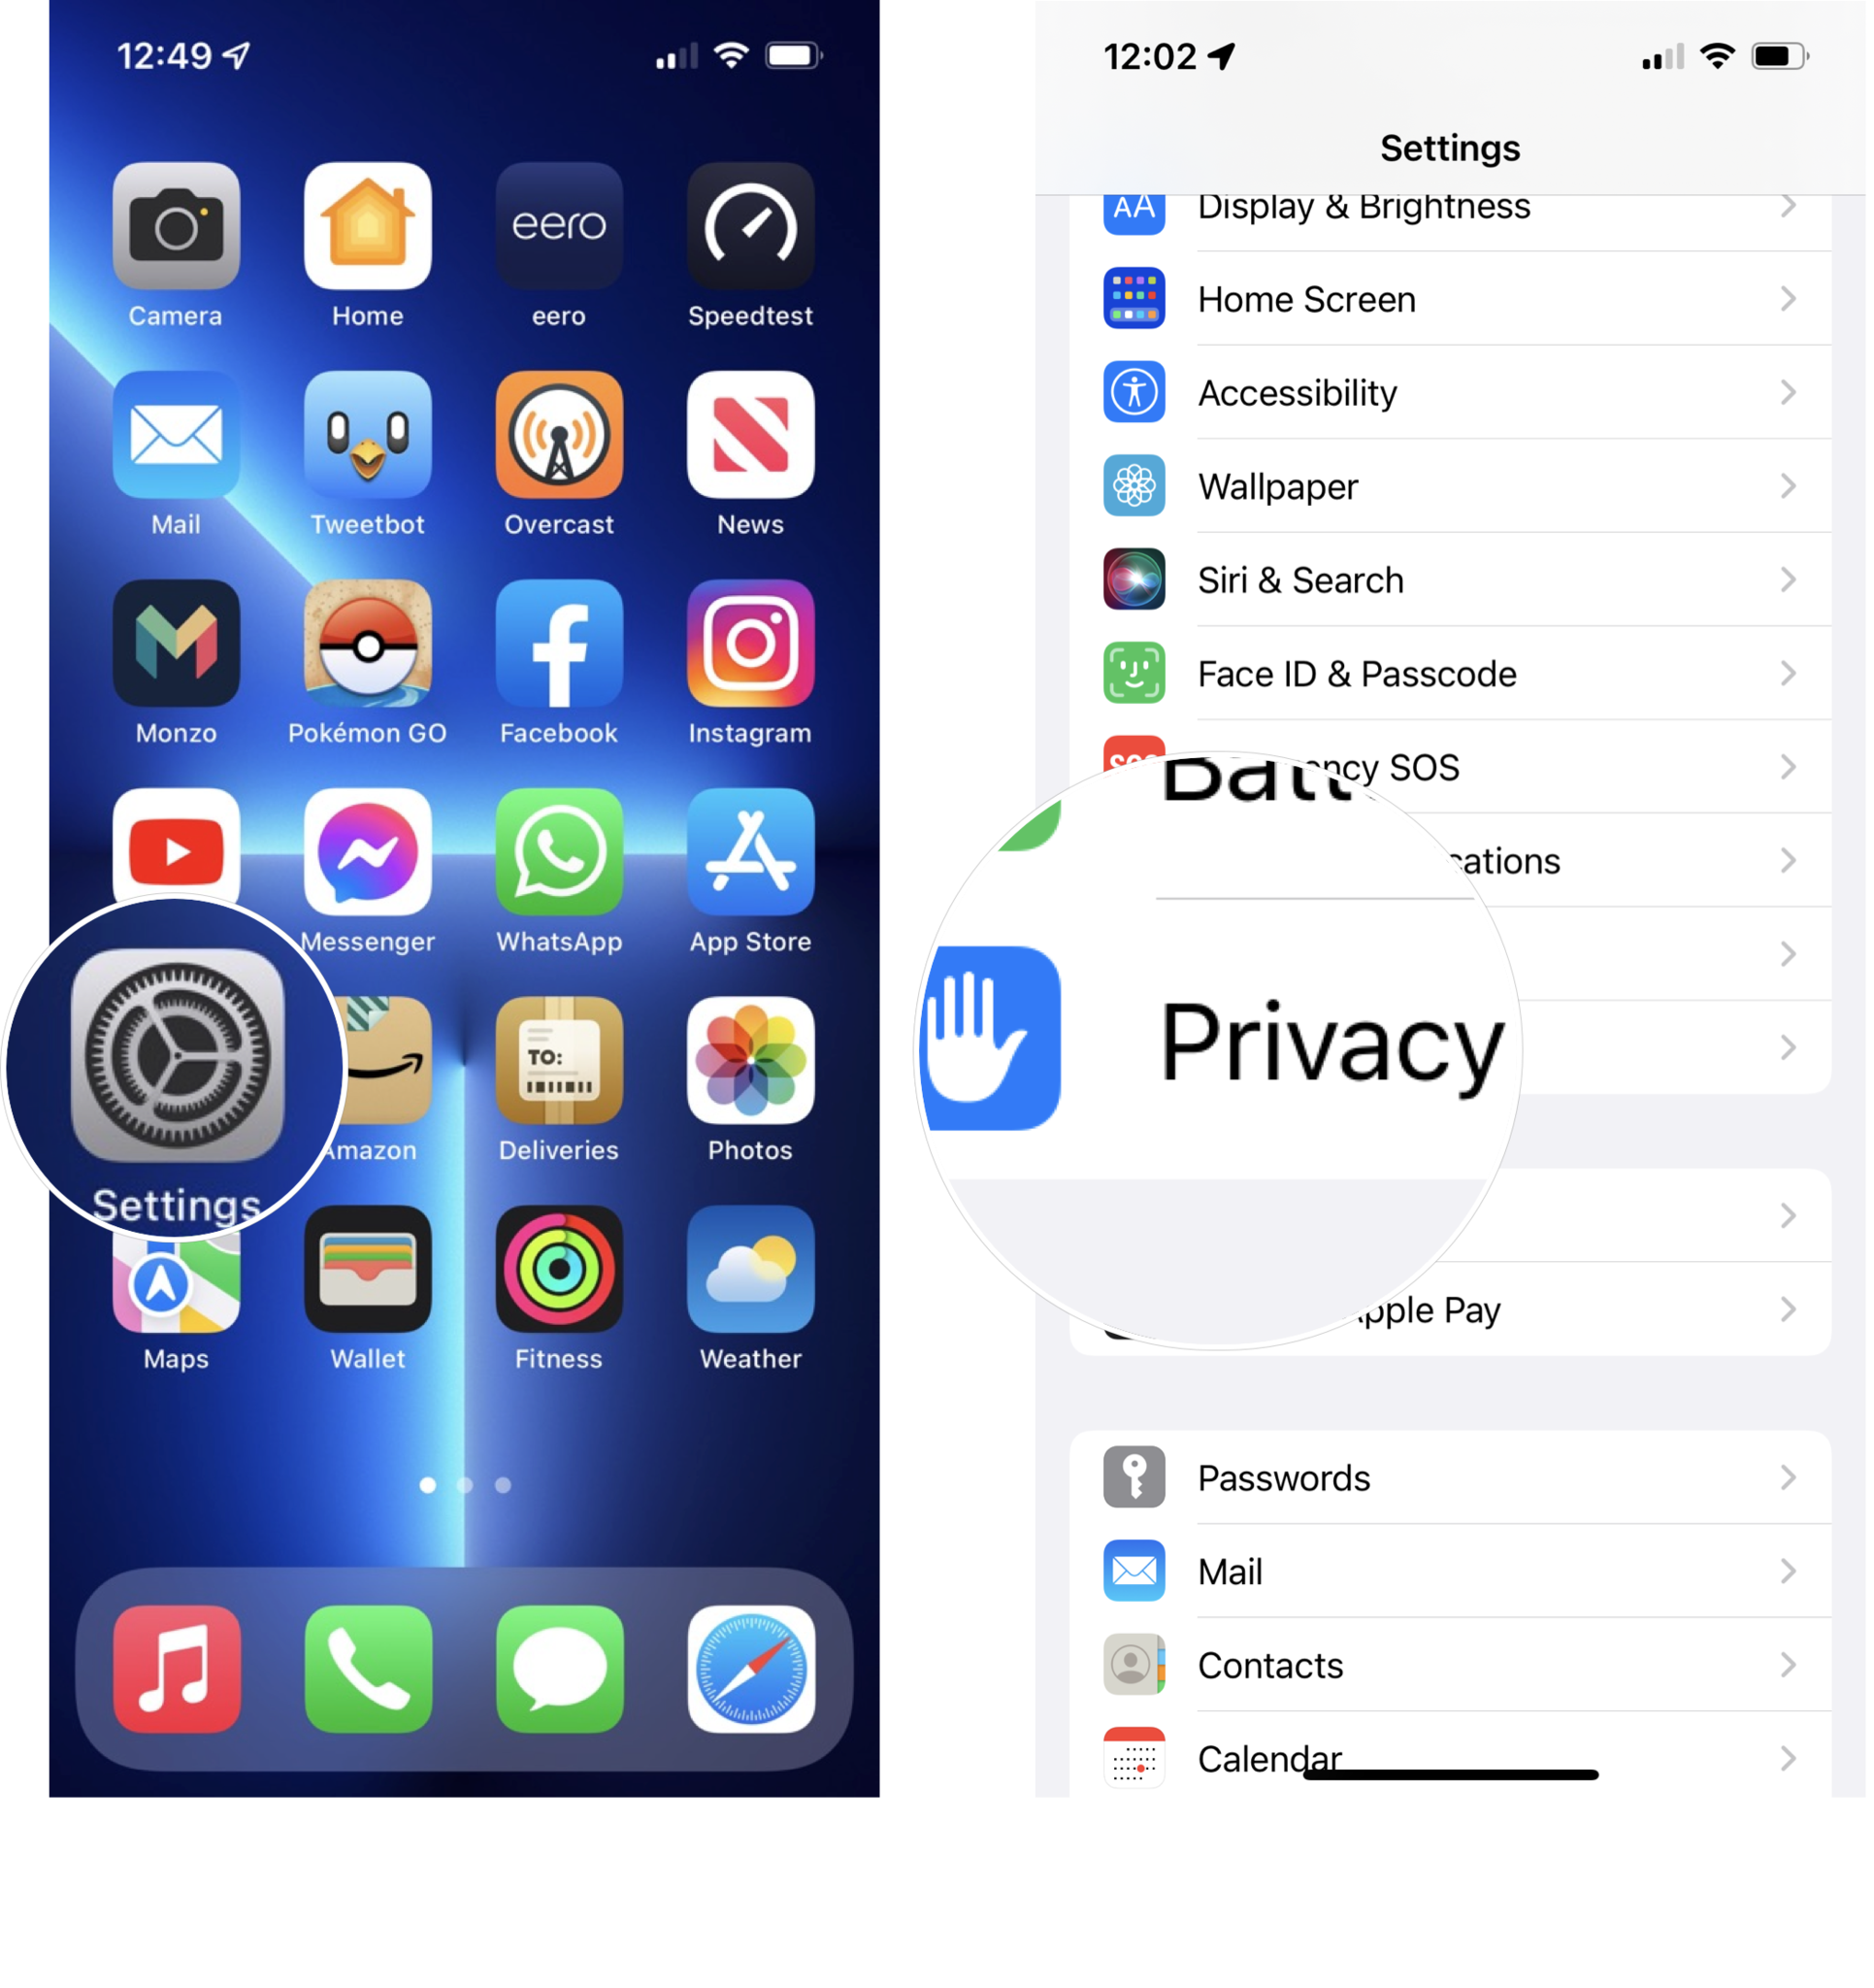 How to turn on App Privacy Report: Open Settings, tap Privacy